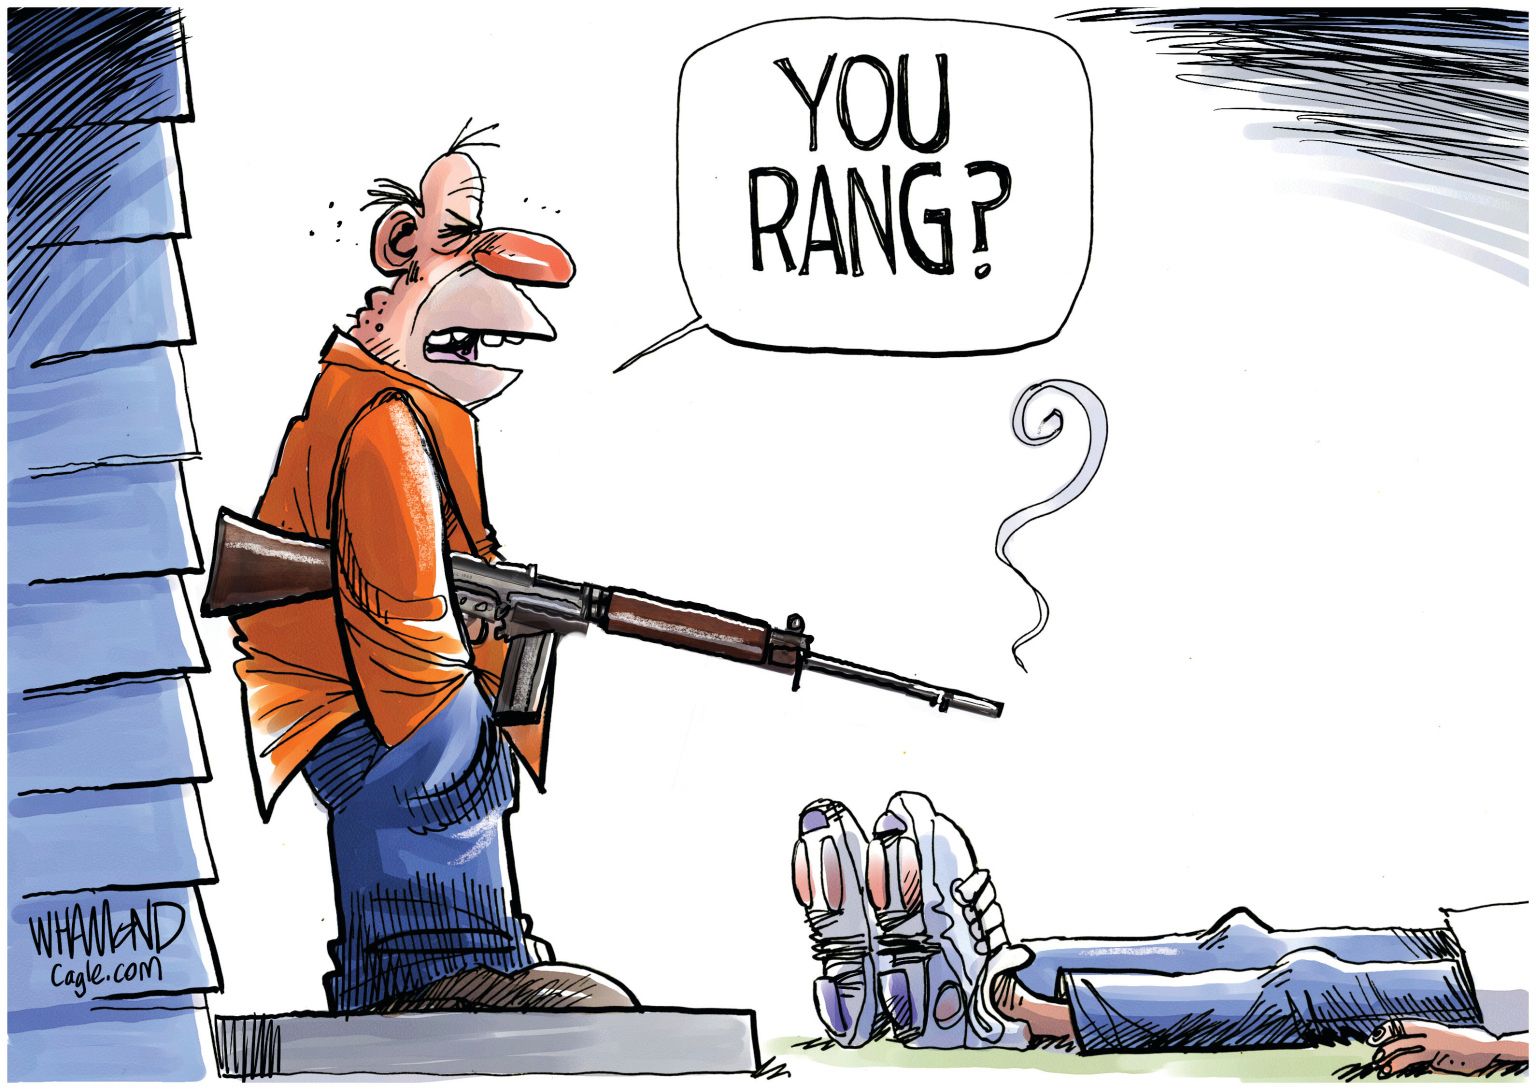 newsjustin.press - In America, knocking on the wrong door will get you shot